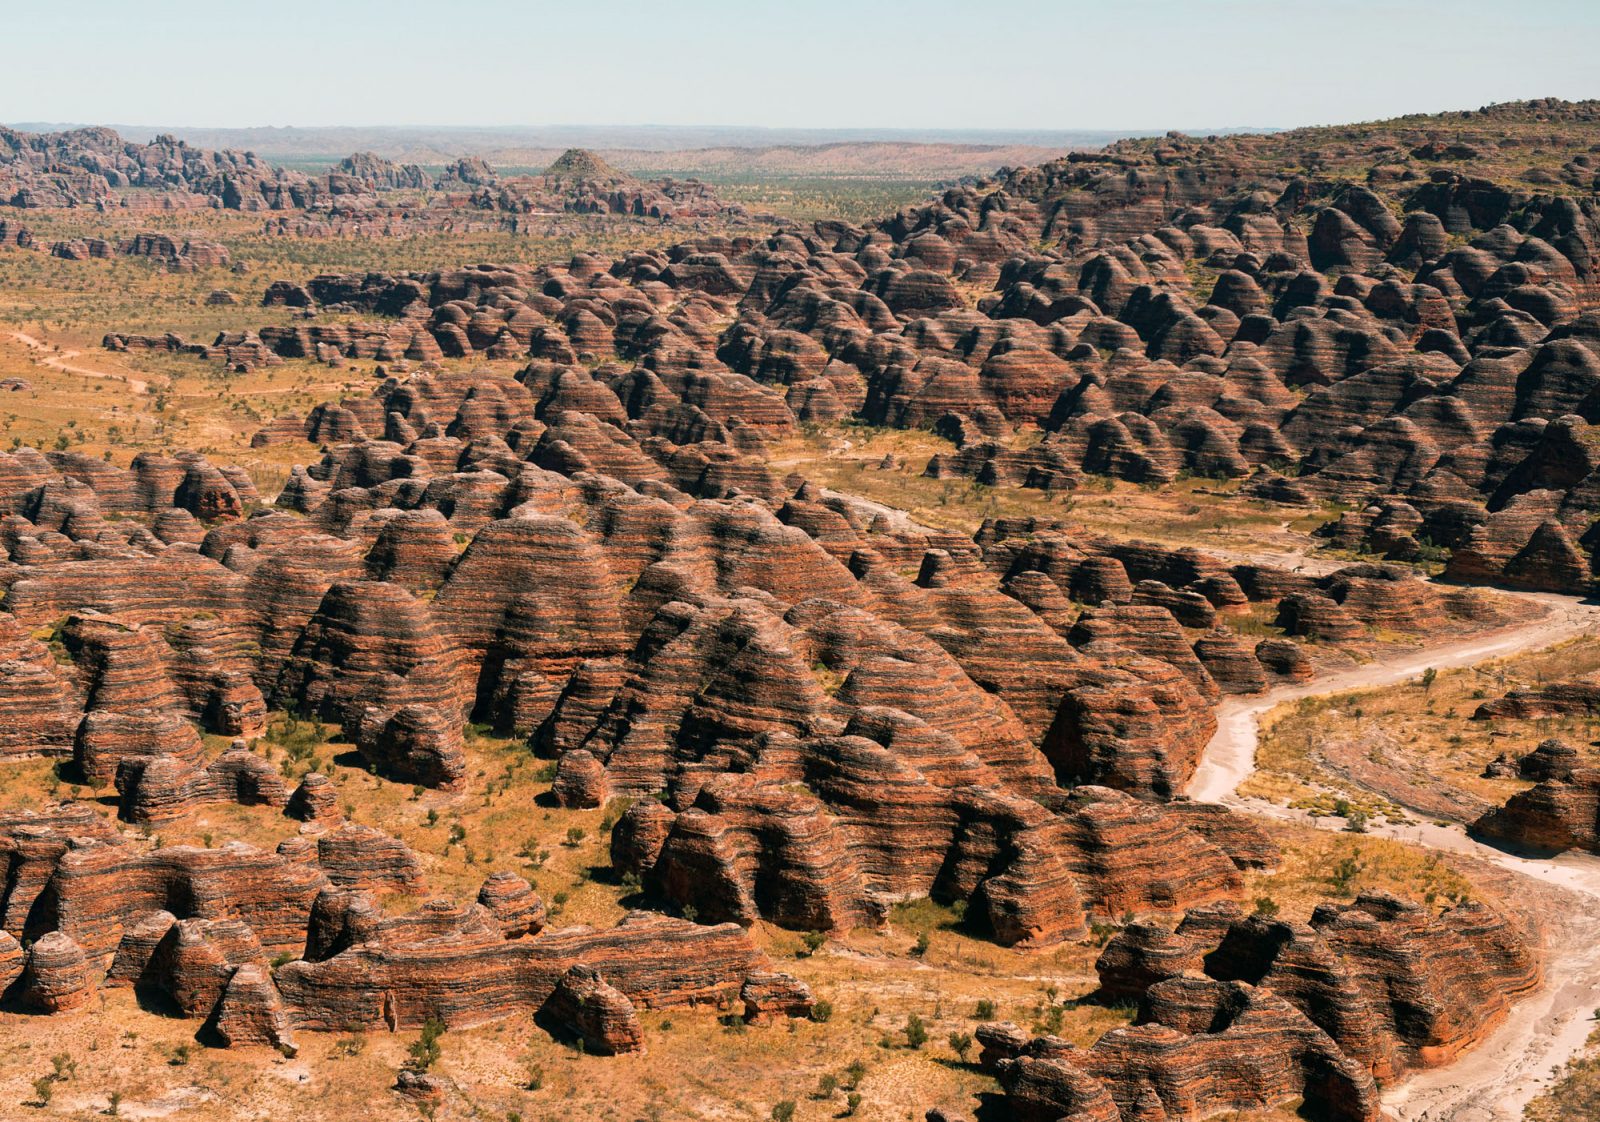 Even If You Don’t Know Much About Geography, Play This World Landmarks Quiz Anyway Bungle Bungle Range, Australia